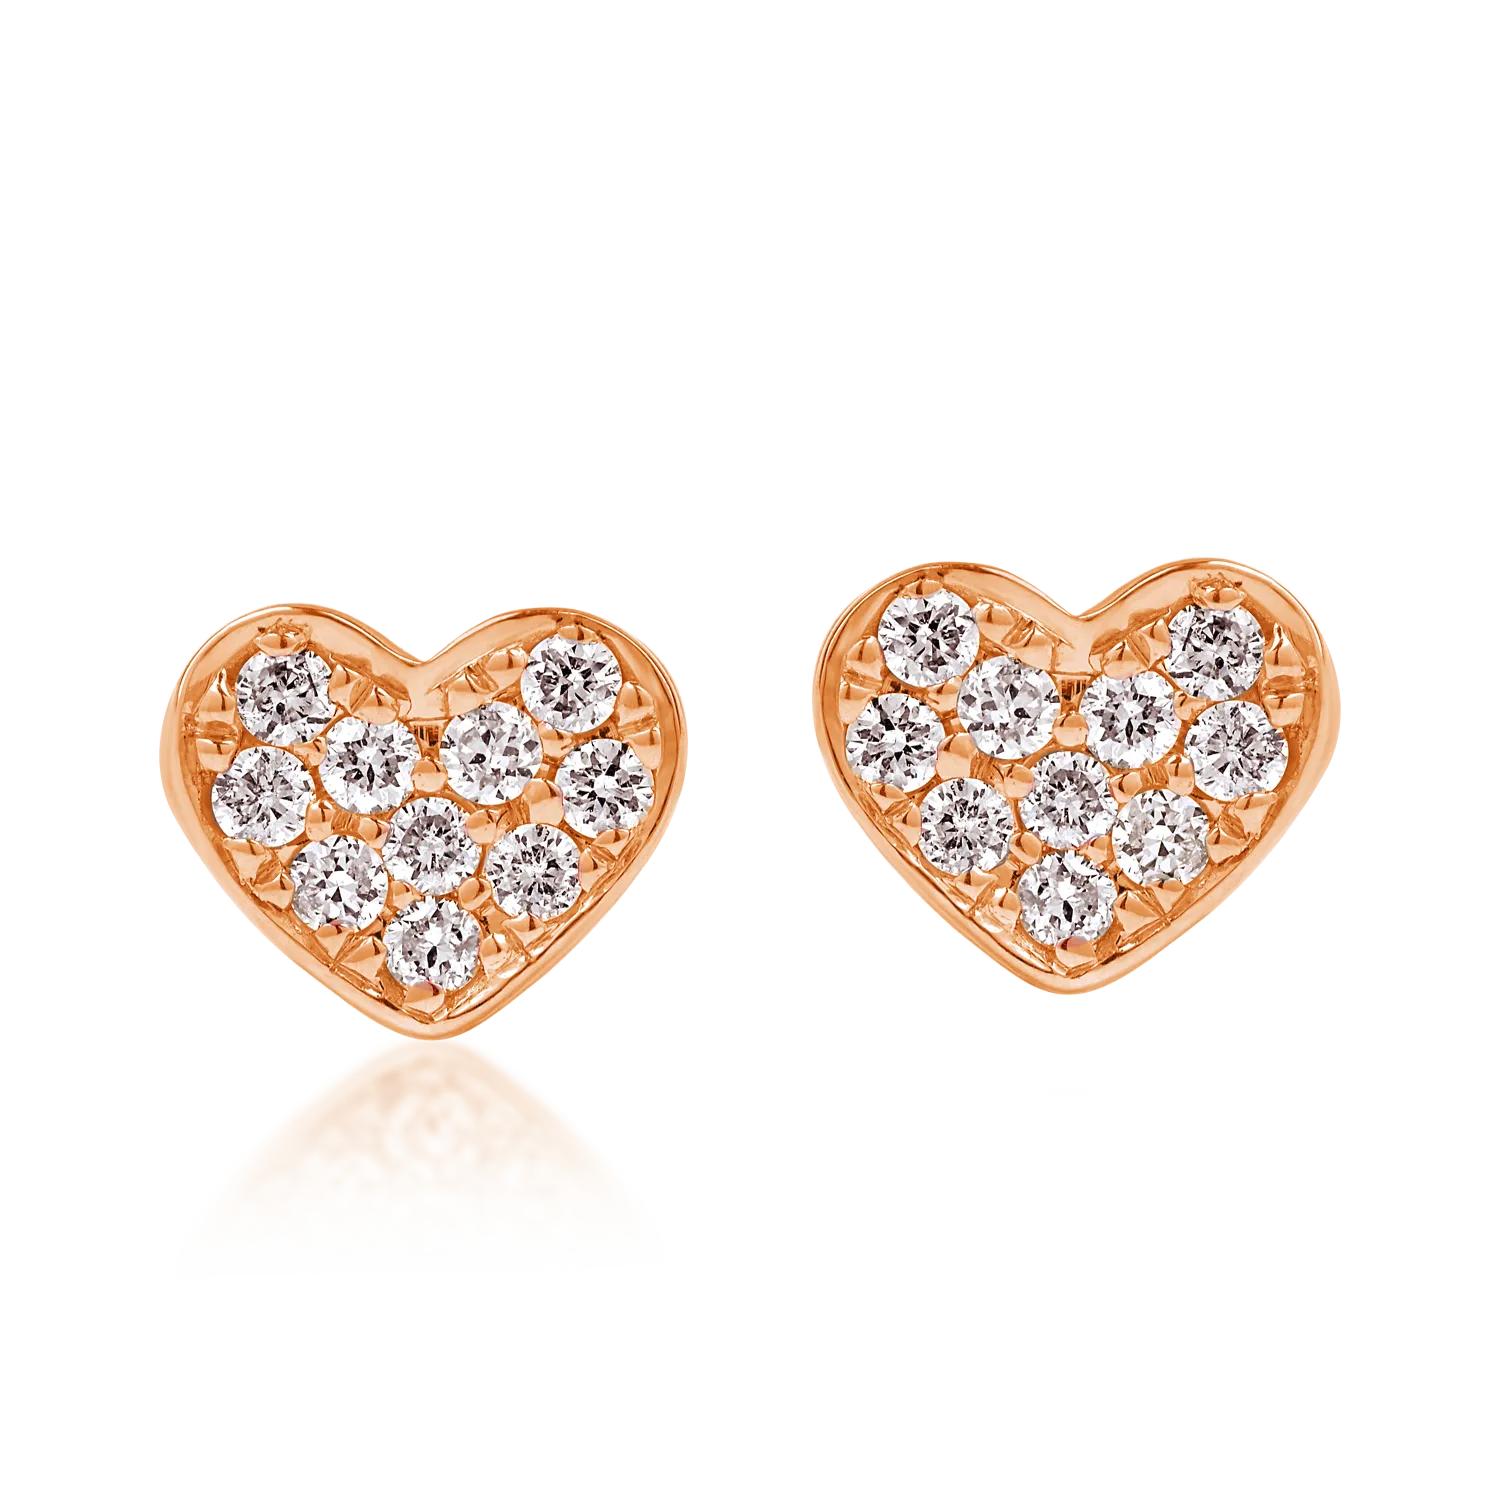 Rose gold heart earrings with 0.22ct diamonds